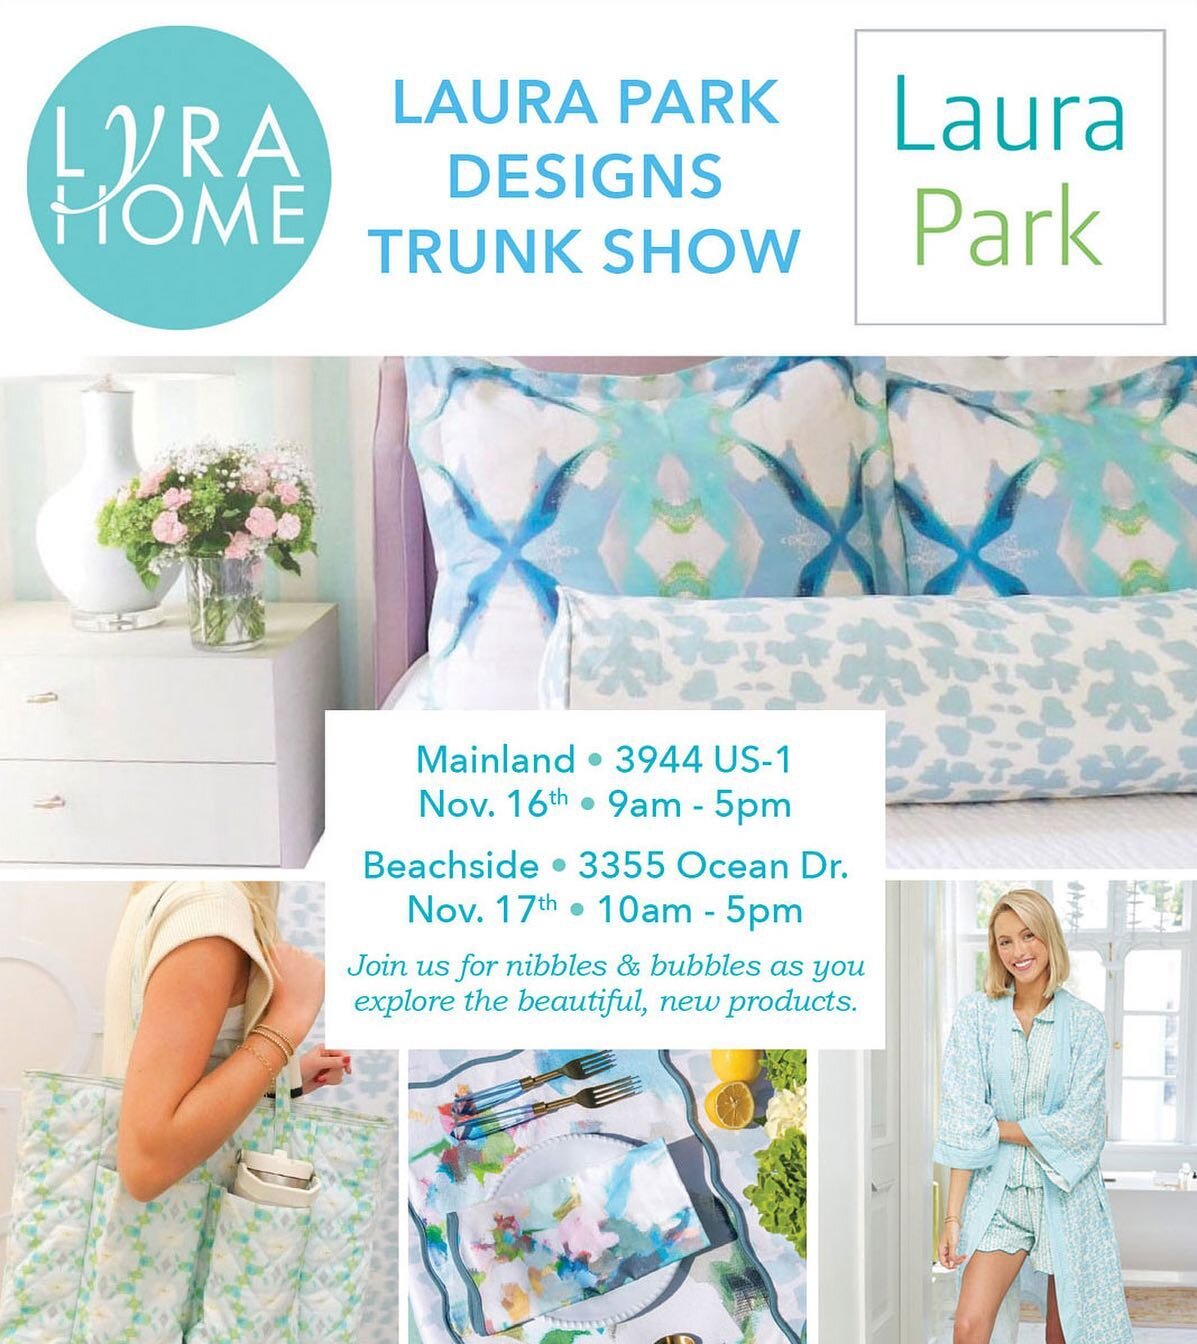 Join us this Thursday and Friday for a @lauraparkdesign trunk show at Lyra Home! Enjoy 20% off all Laura Park purchases.